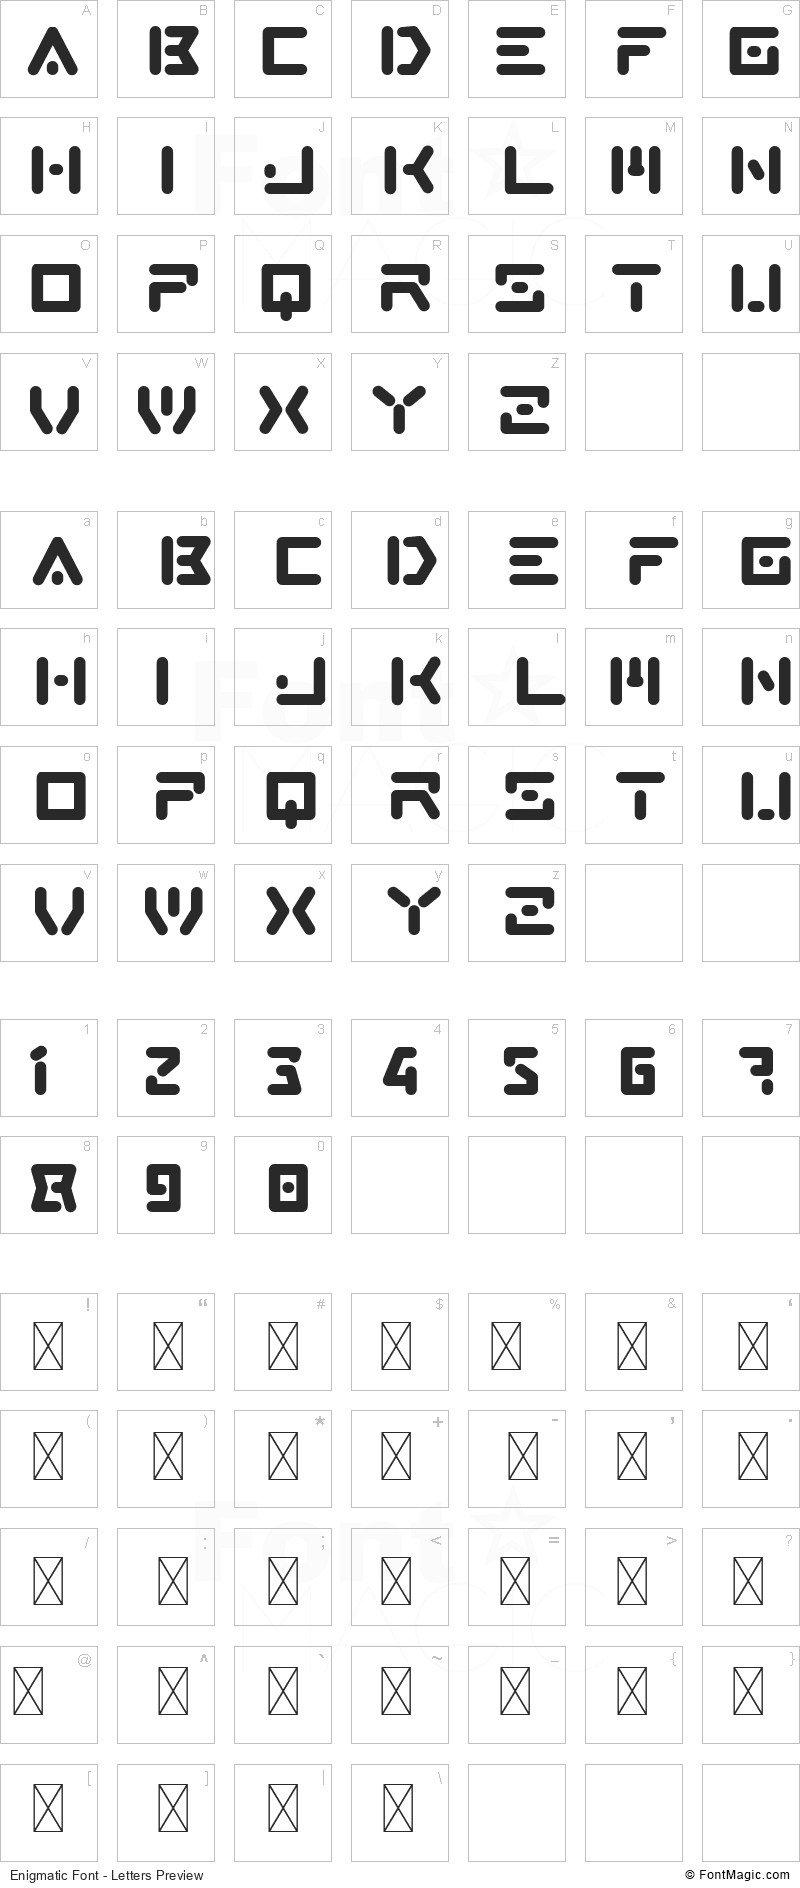 Enigmatic Font - All Latters Preview Chart